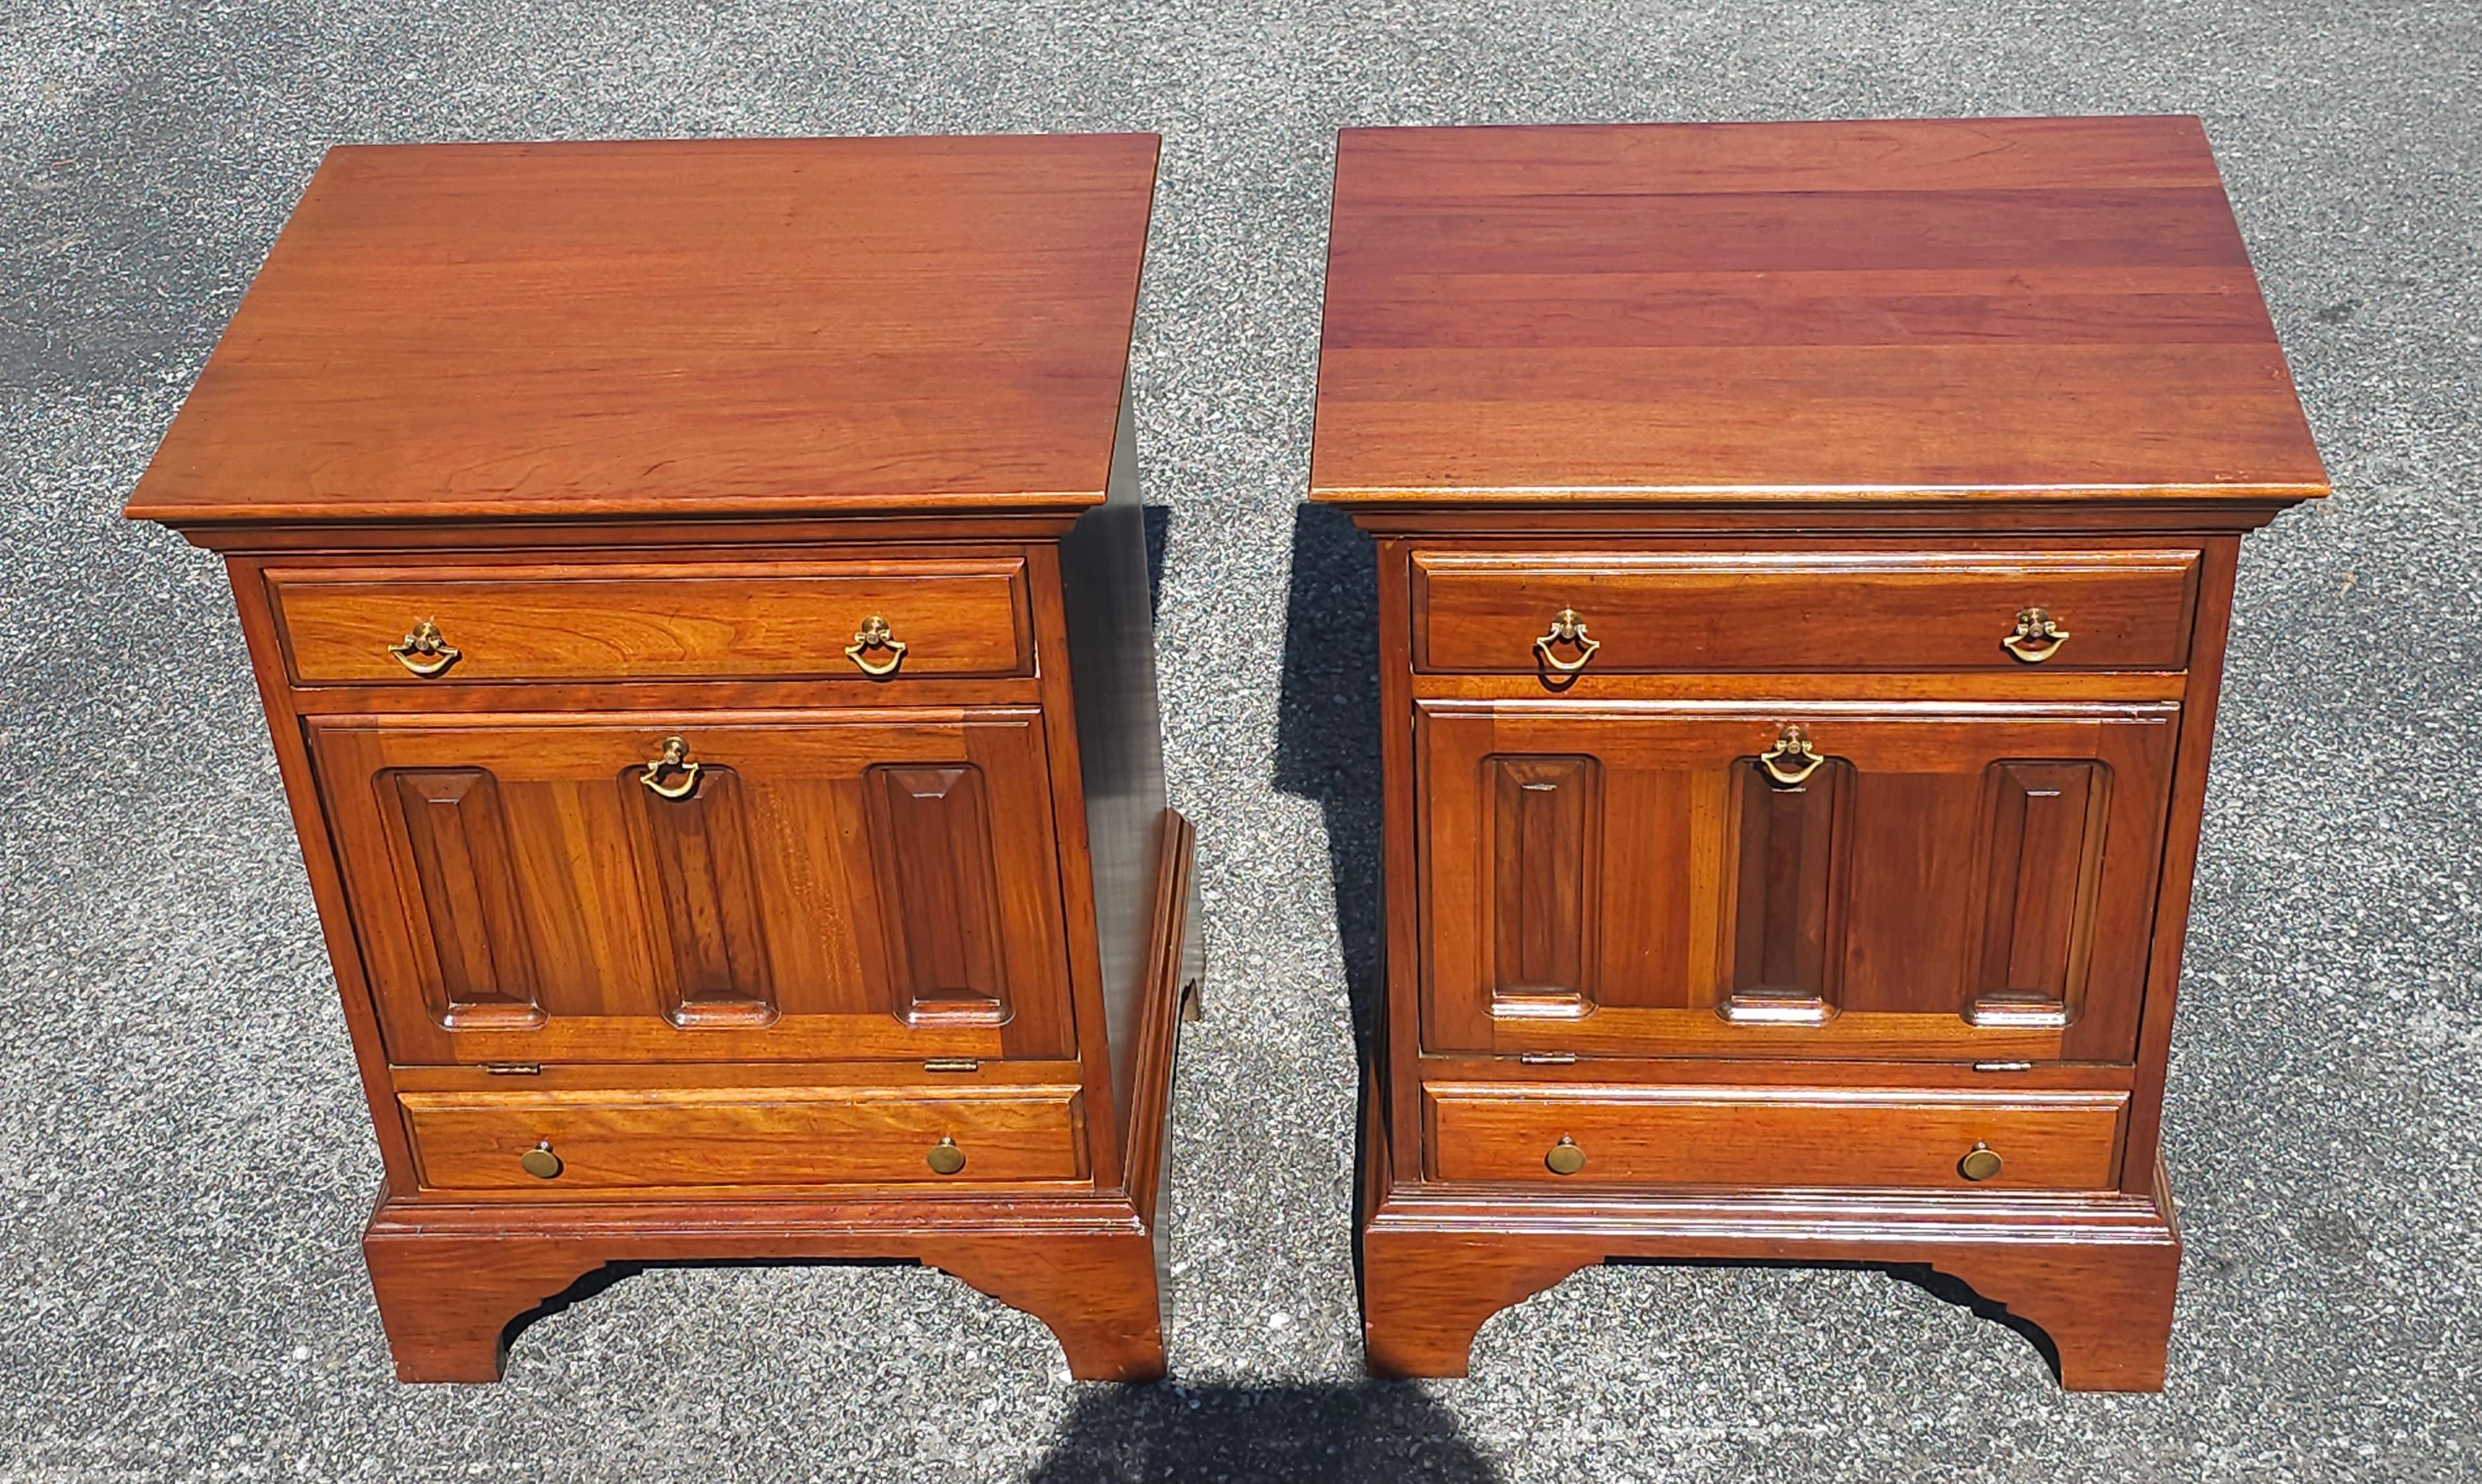 Other 20th Century David Cabinet Cherry 2-Drawer a Abattant Door Bedside Cabinets Pair For Sale